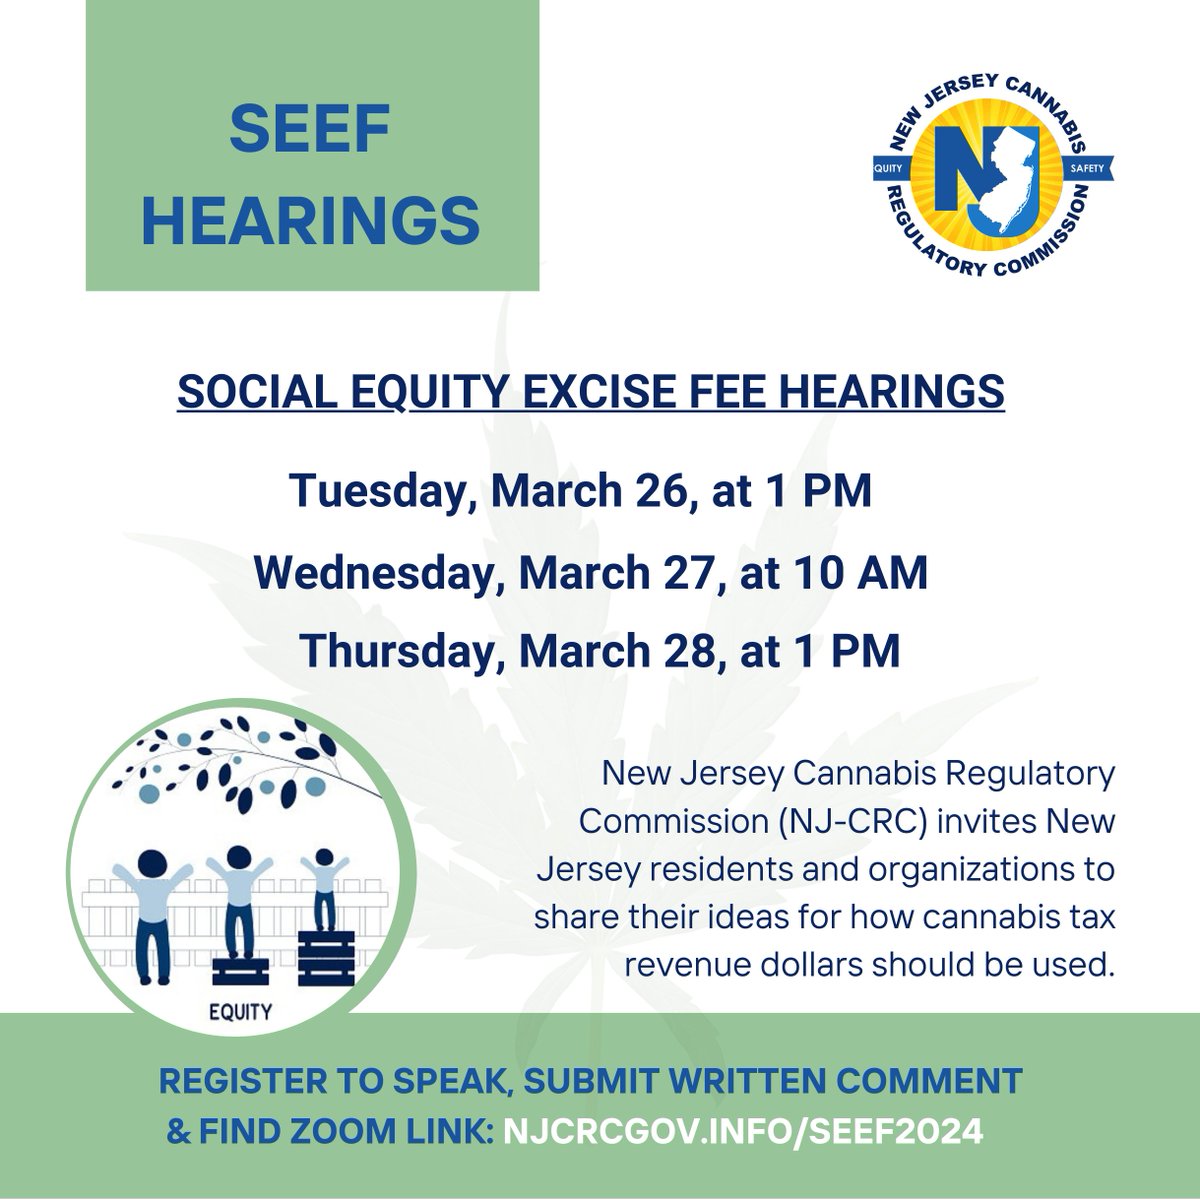 NJ residents will have three opportunities in March to share their ideas about how to use funds from social equity excise fees. Visit our website to register to speak in person, submit a written comment, or watch the SEEF hearings on Zoom. njcrcgov.info/meetings